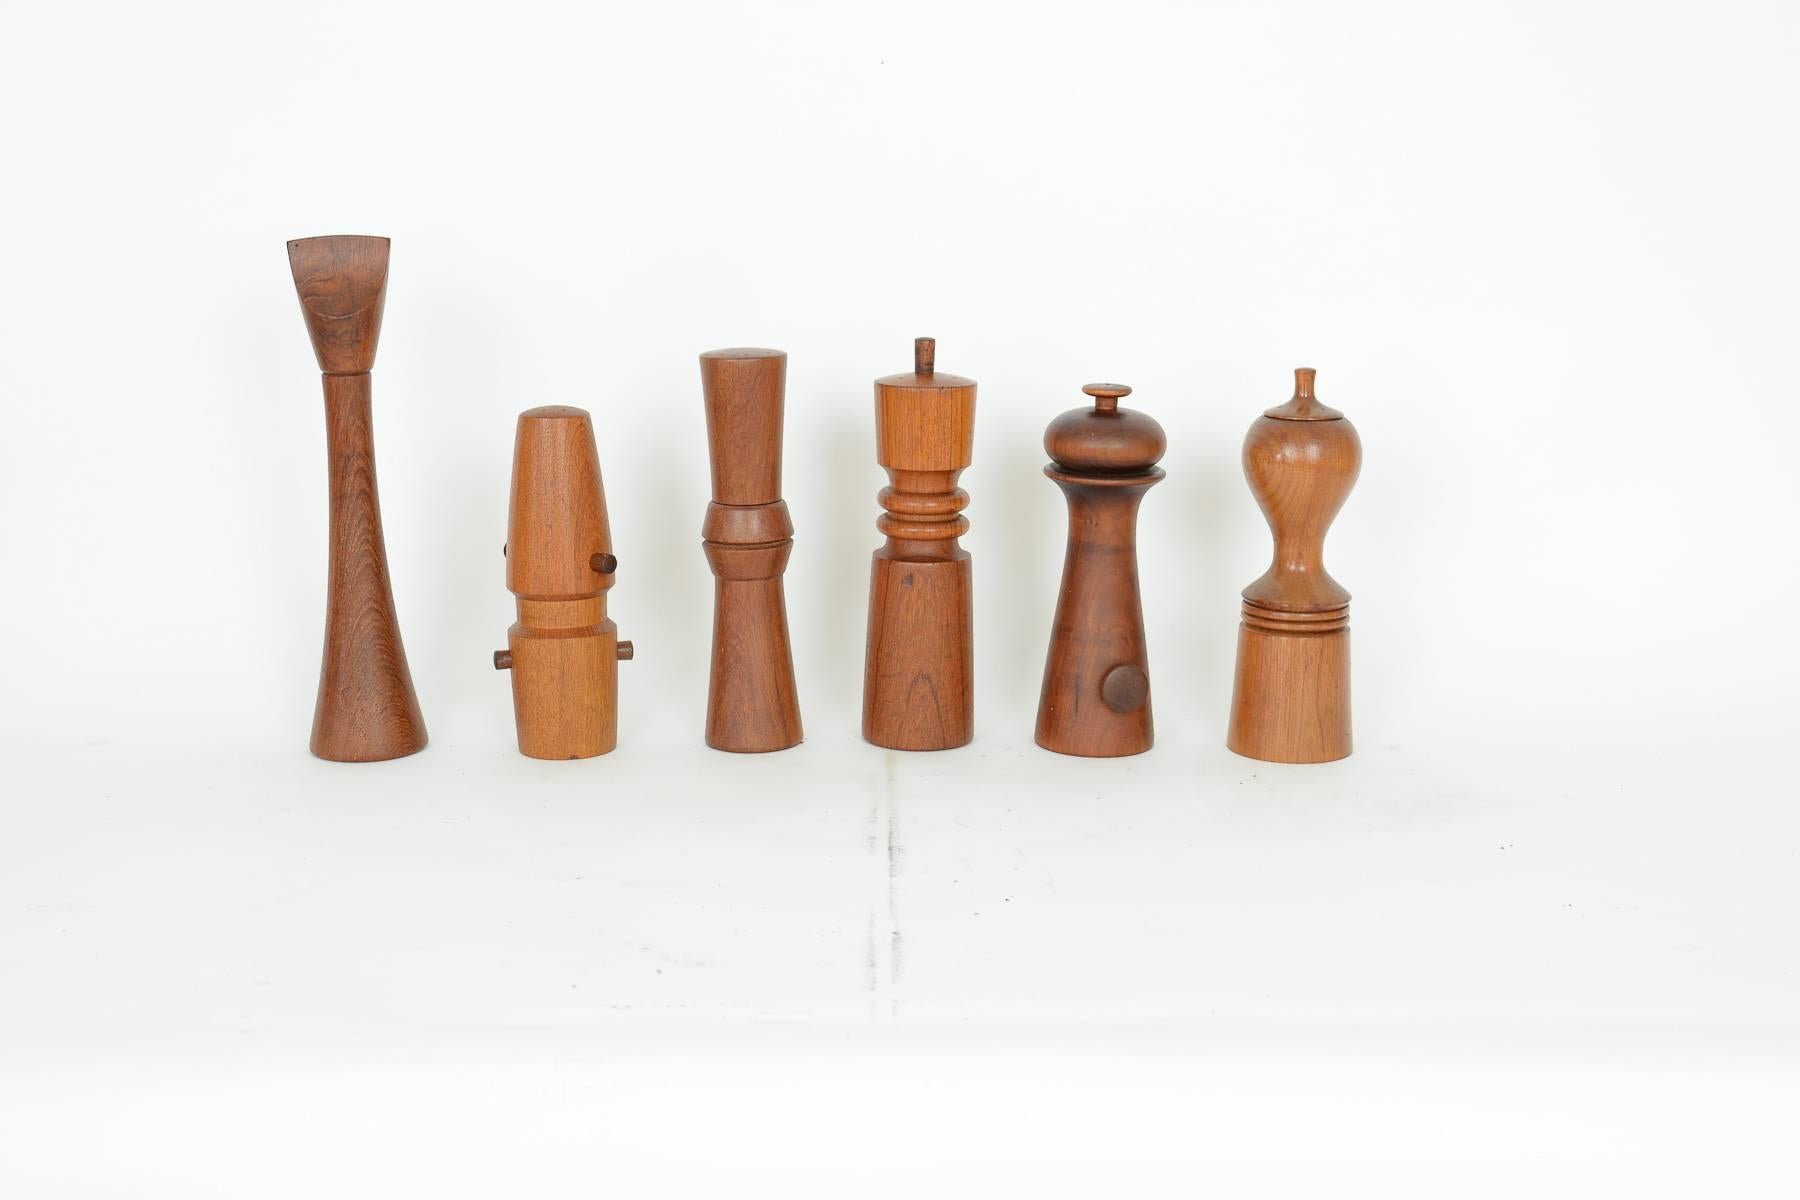 Scandinavian Modern Collection of 25 Dansk Peppermills by Jens Quistgaard and Others Designers